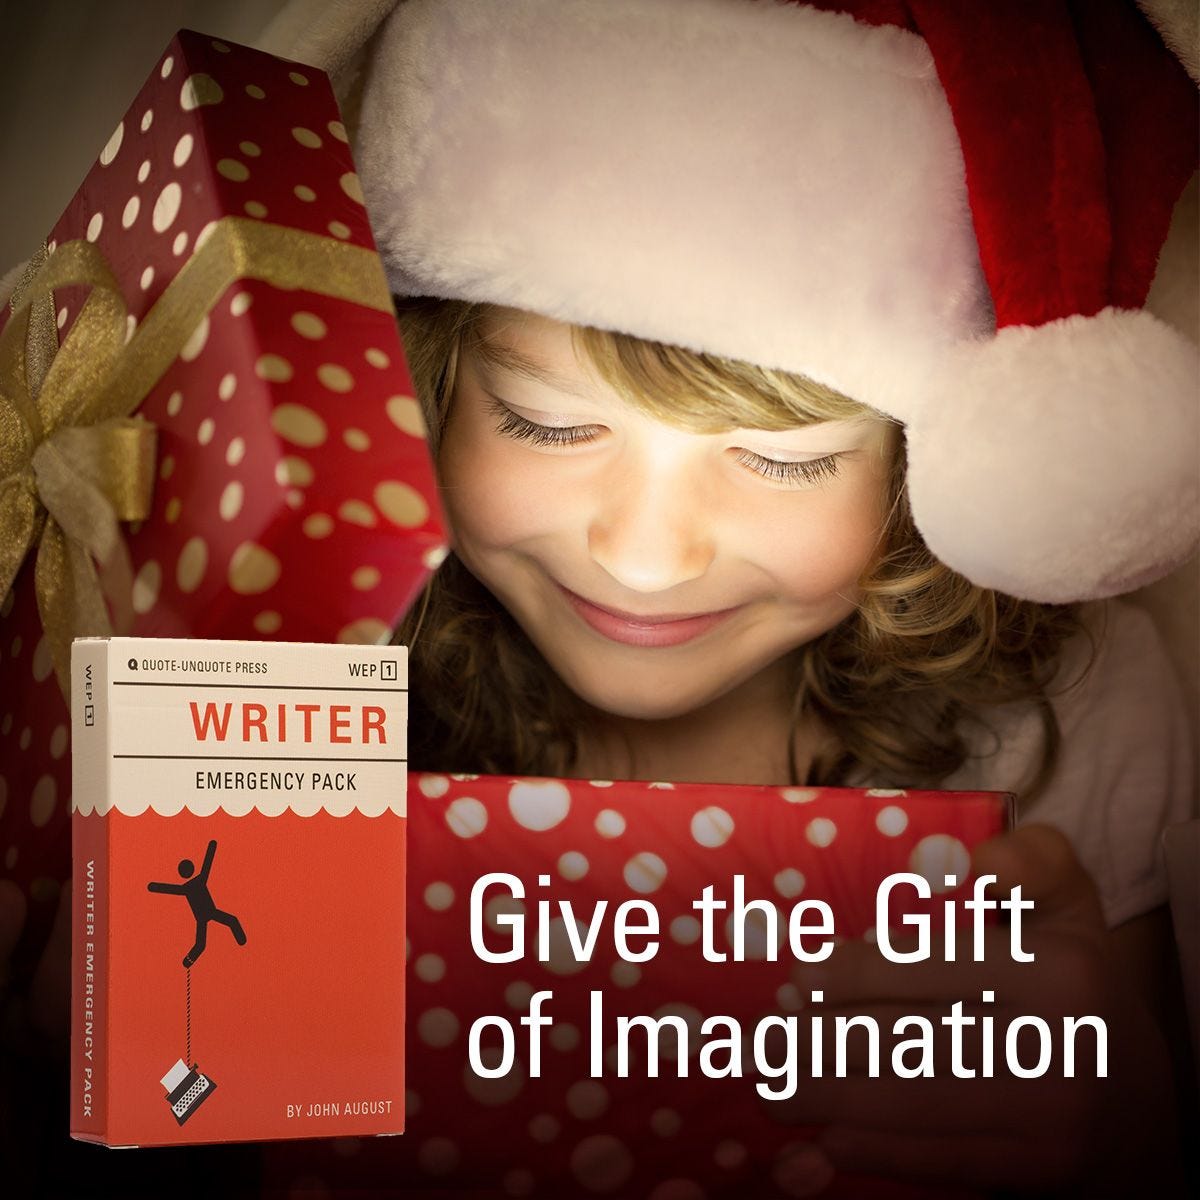 Writer Emergency Pack ad. Child opening a Christmas present. Caption: Give the Gift of Imagination